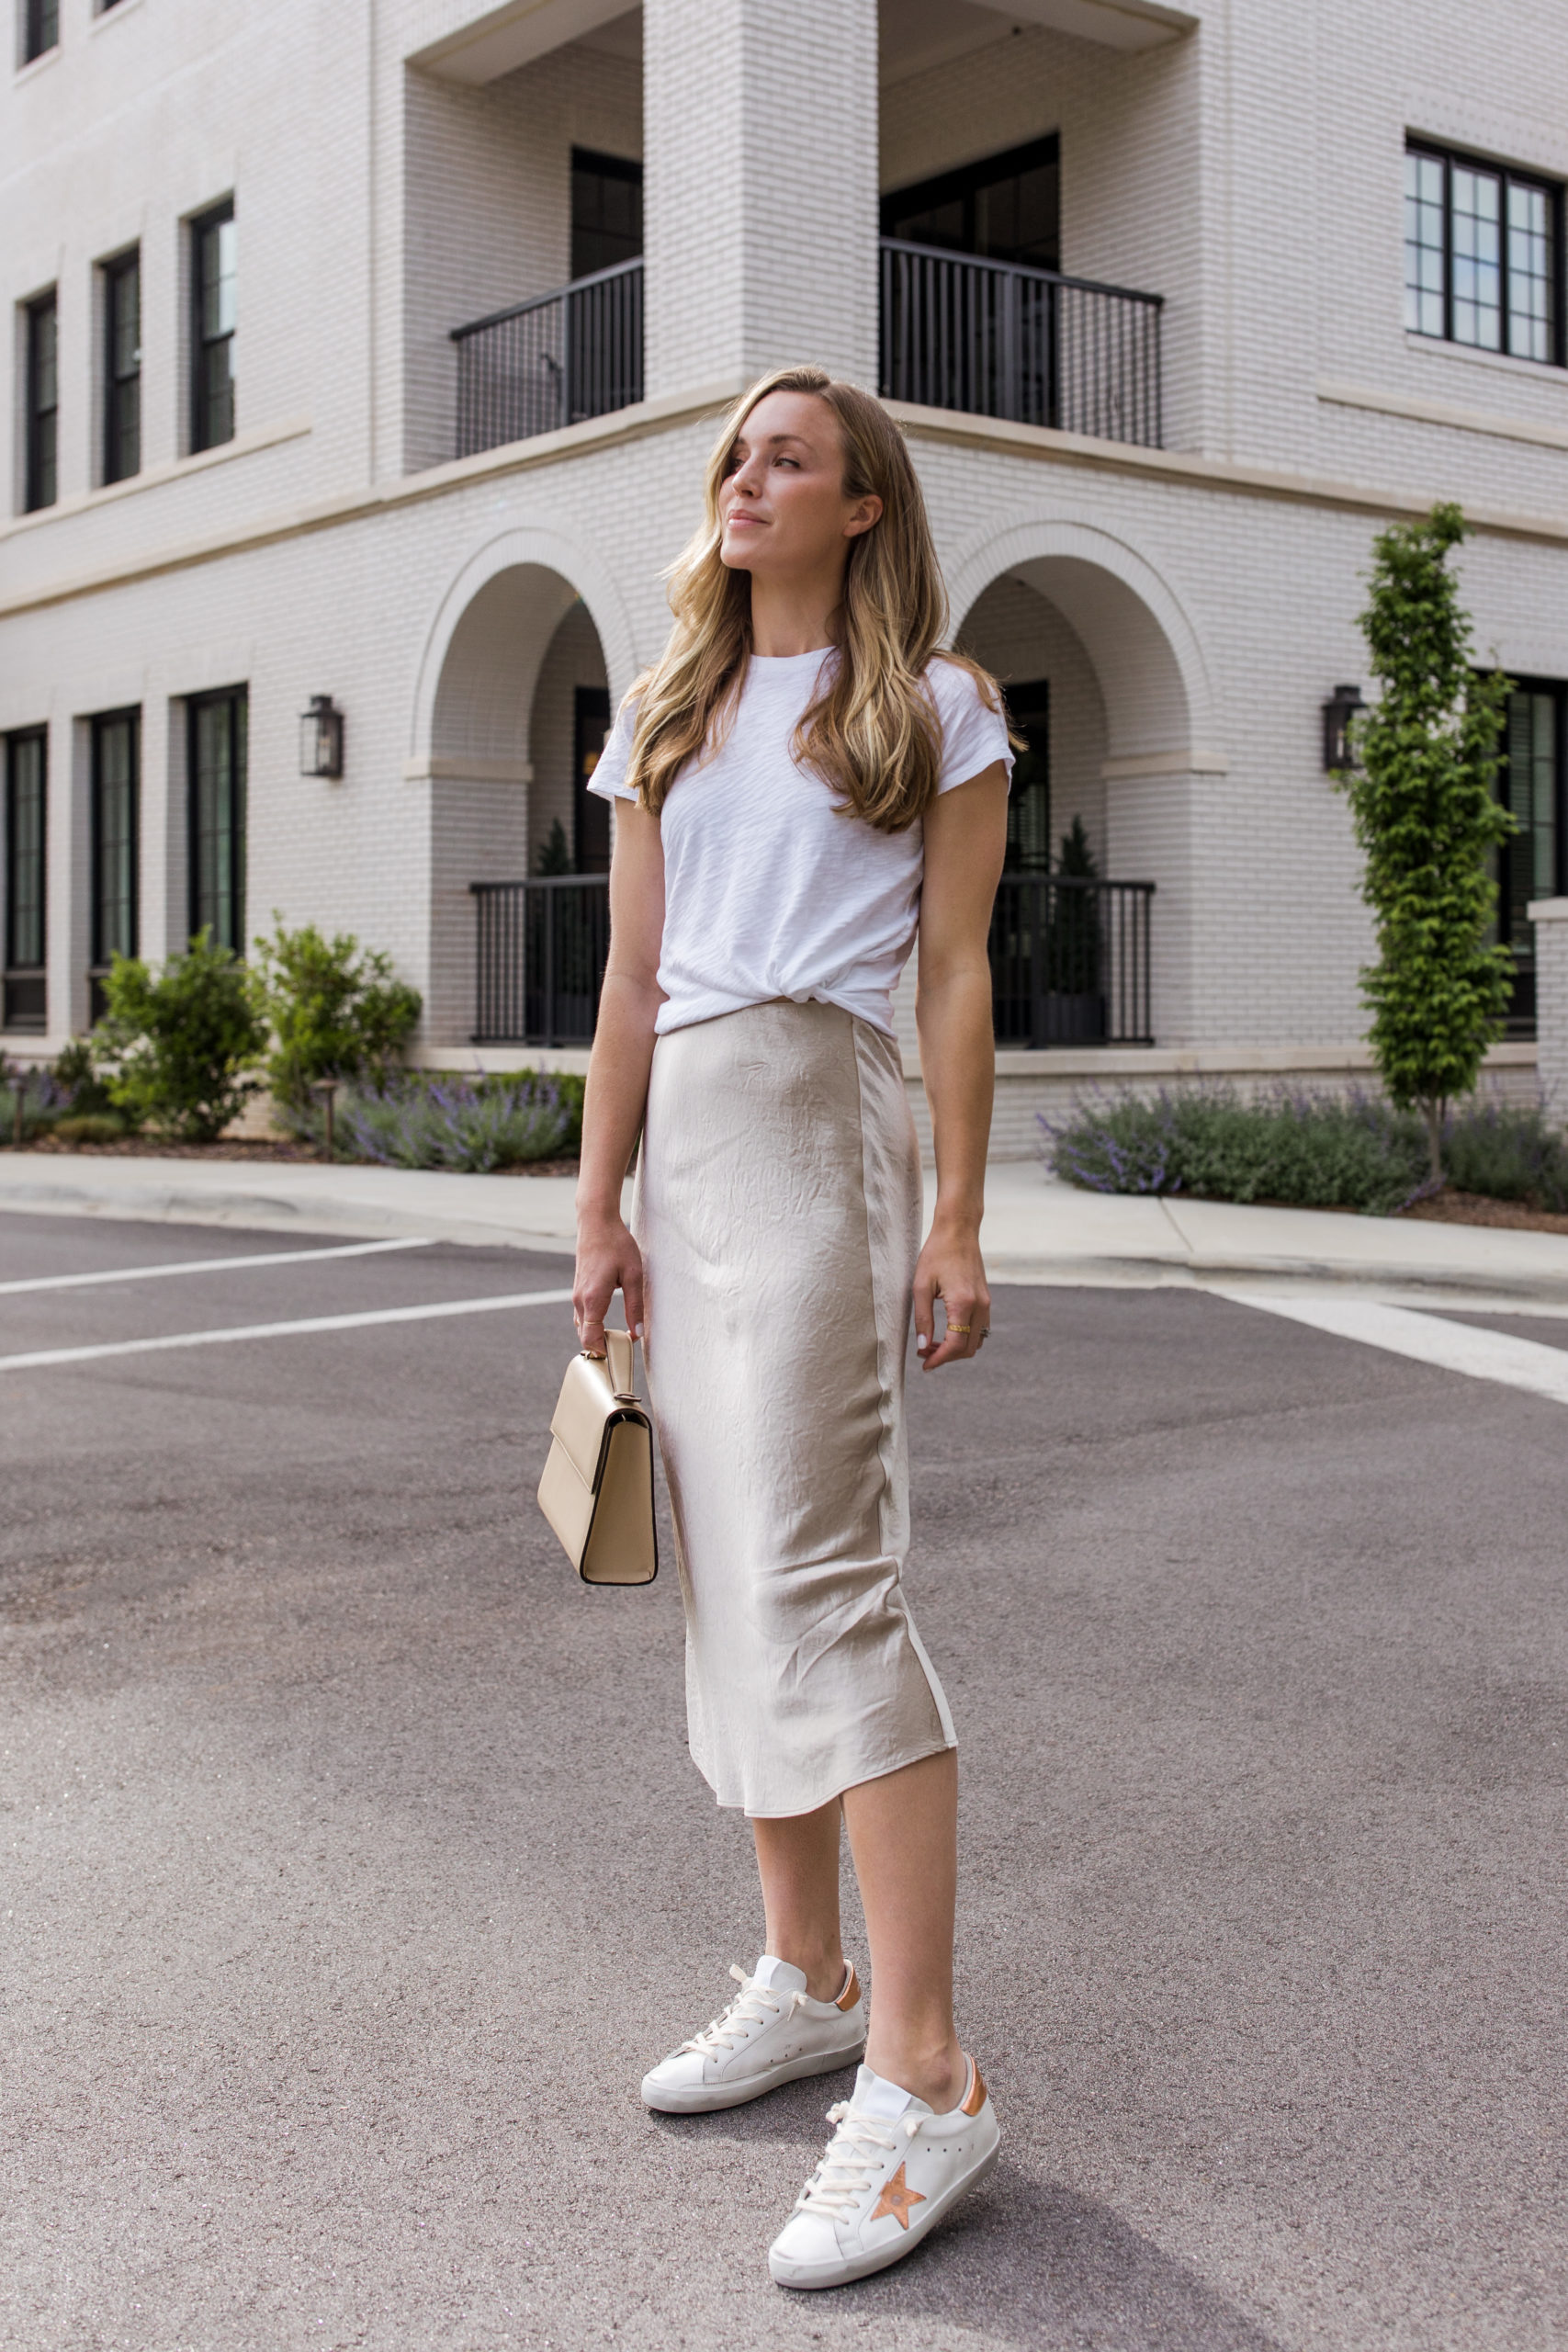 How to Style a Slip Skirt